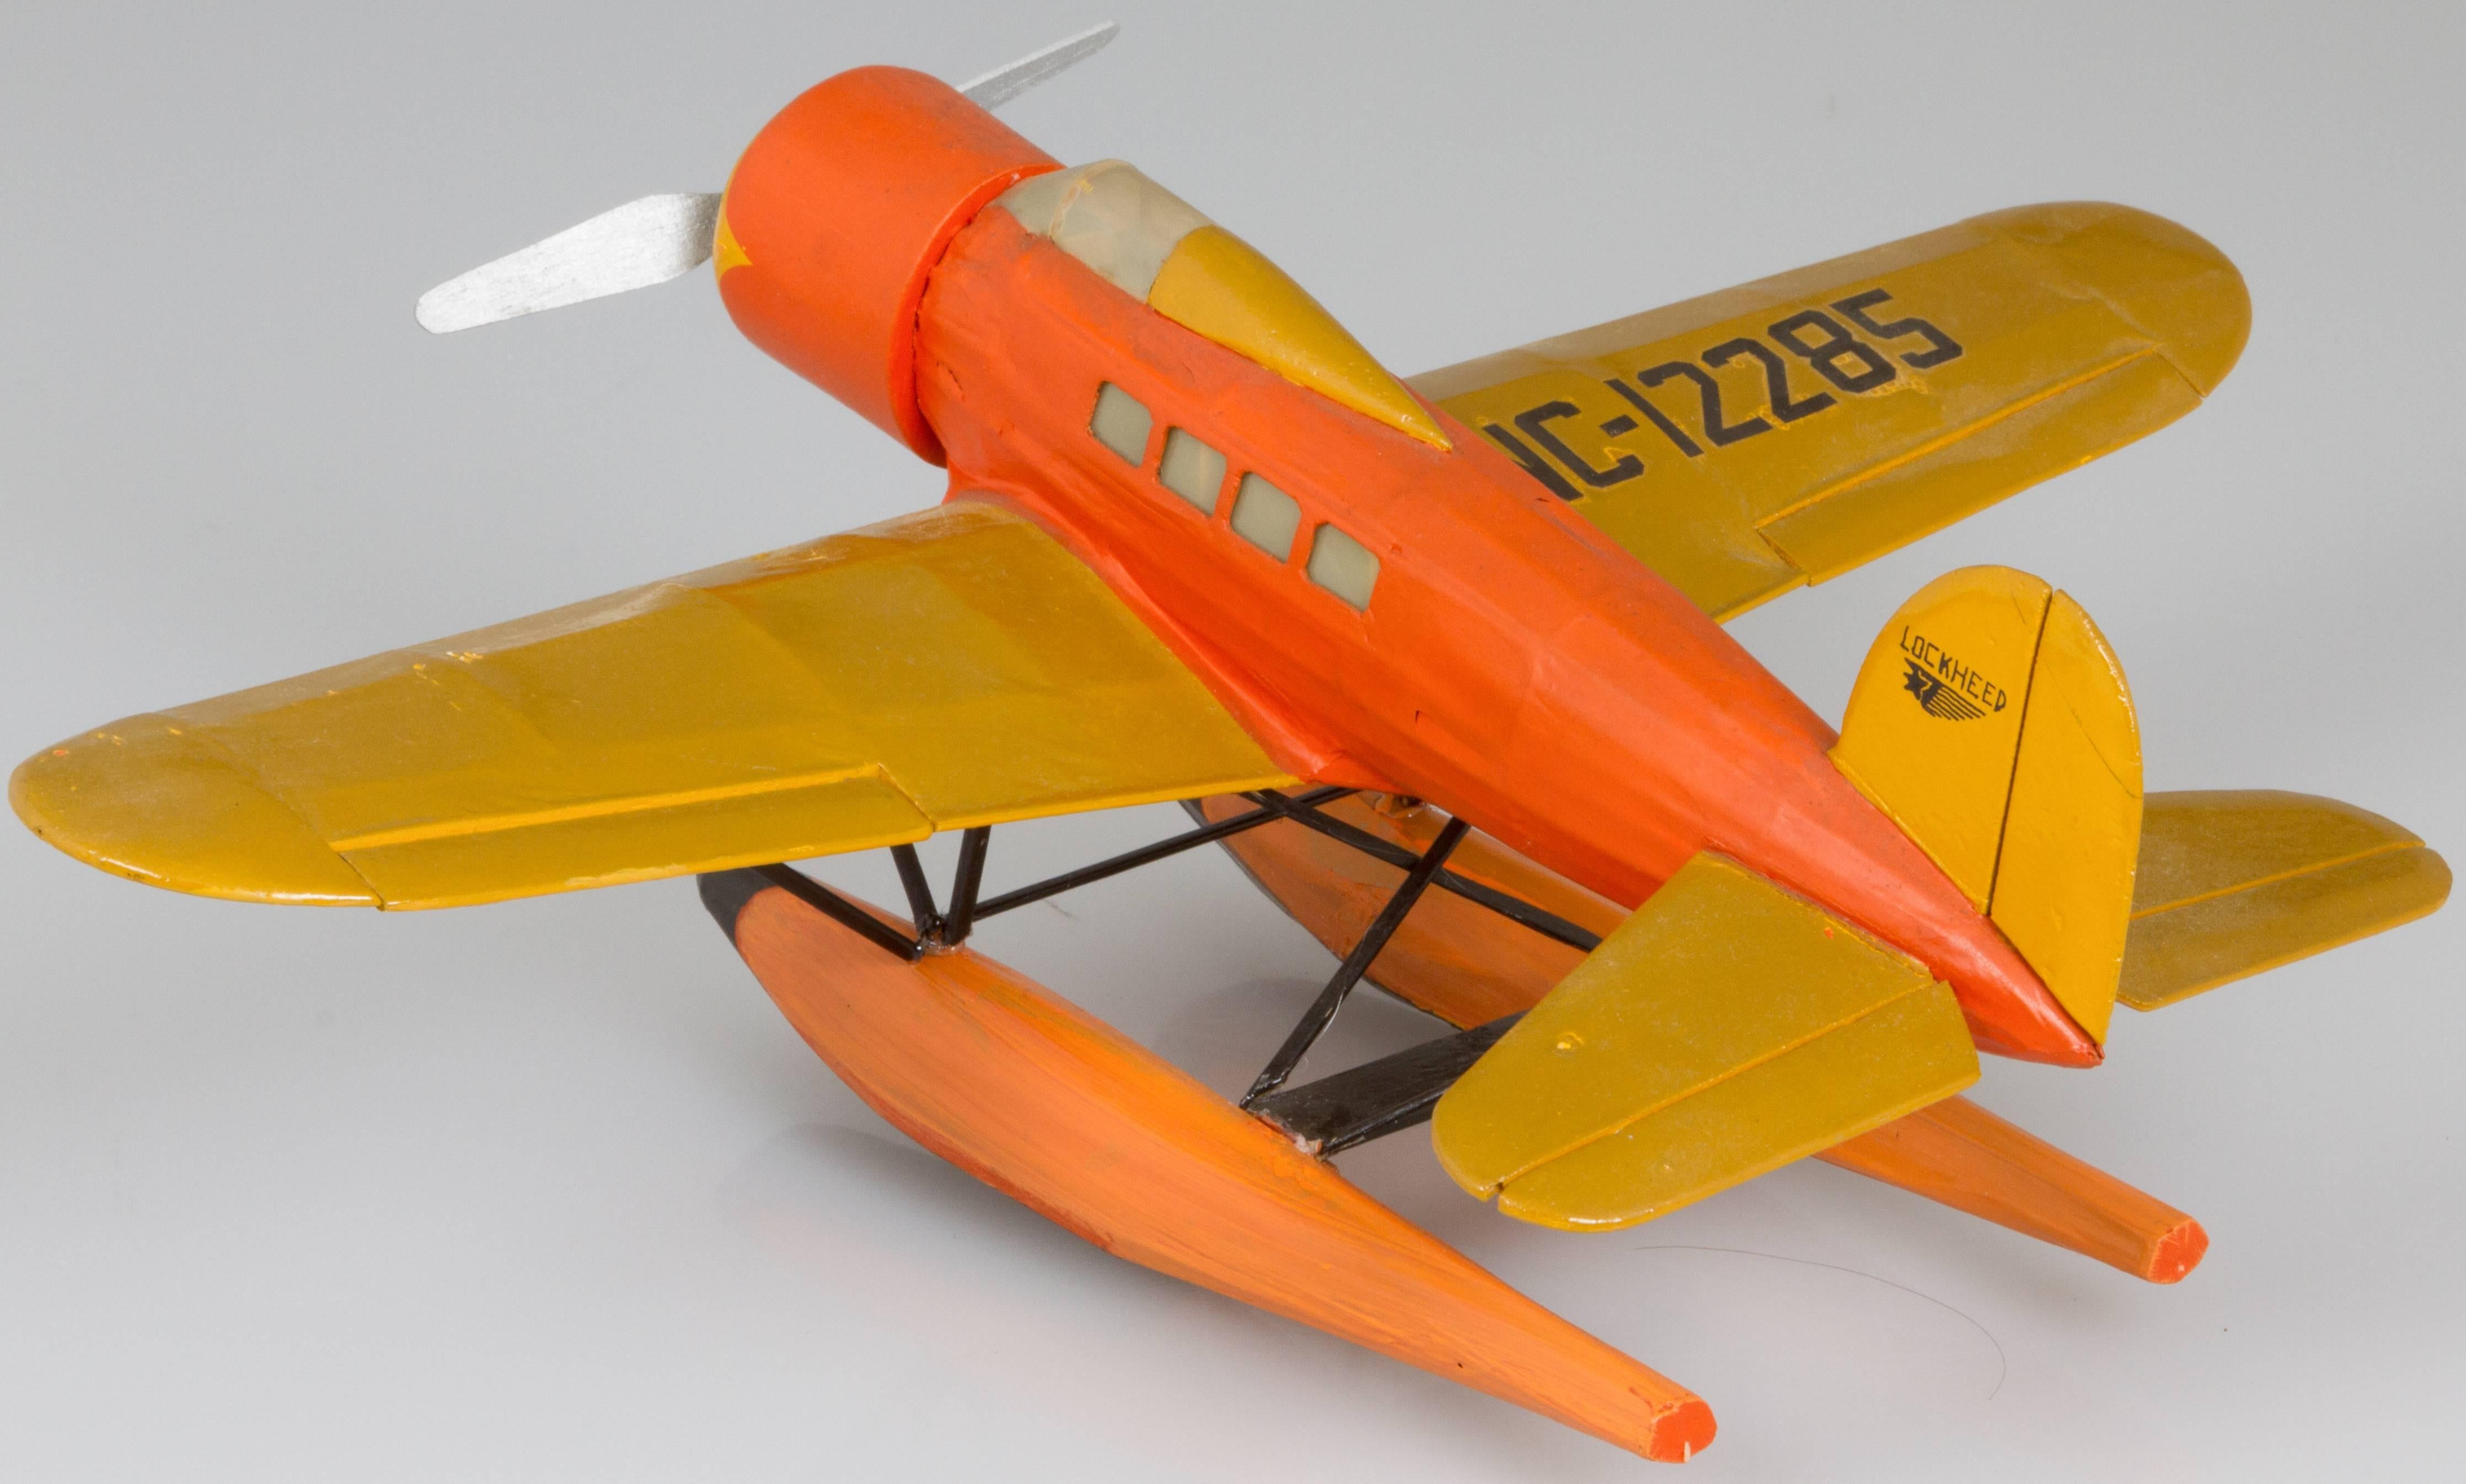 American Model of the Lockheed Orion Seaplane NC-12285 For Sale